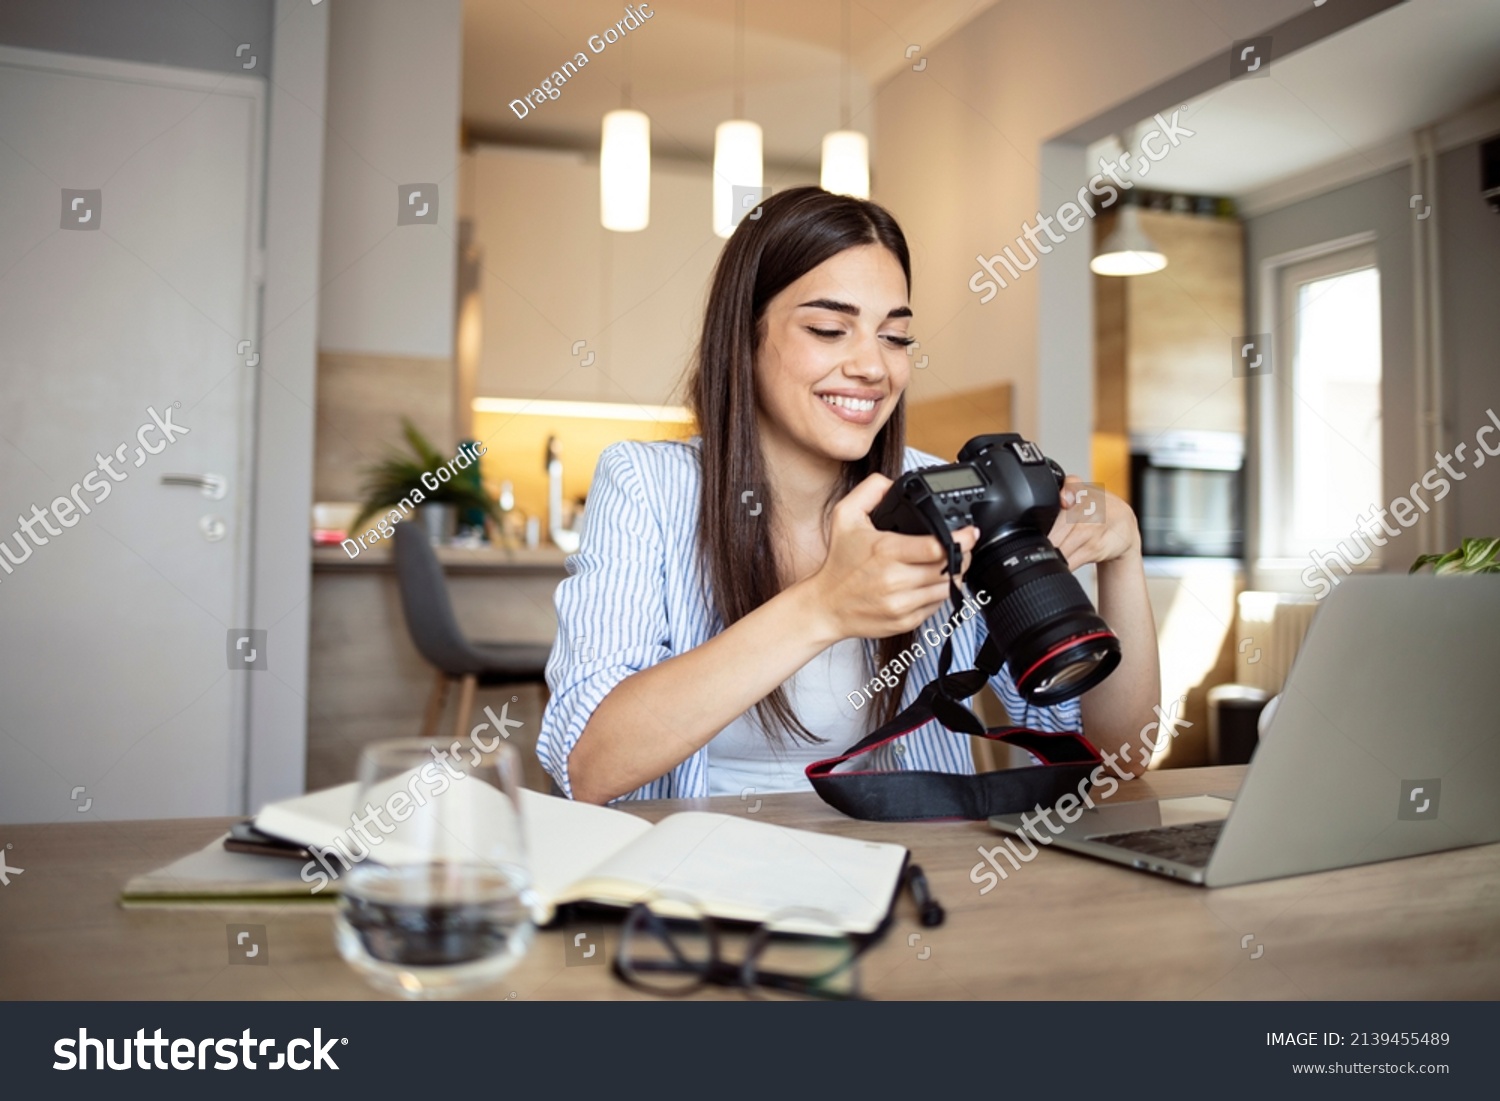 Happy young photographer holding a dslr camera in her home office. Female photographer smiling cheerfully while working at her desk. Creative female freelancer working on a new project. #2139455489